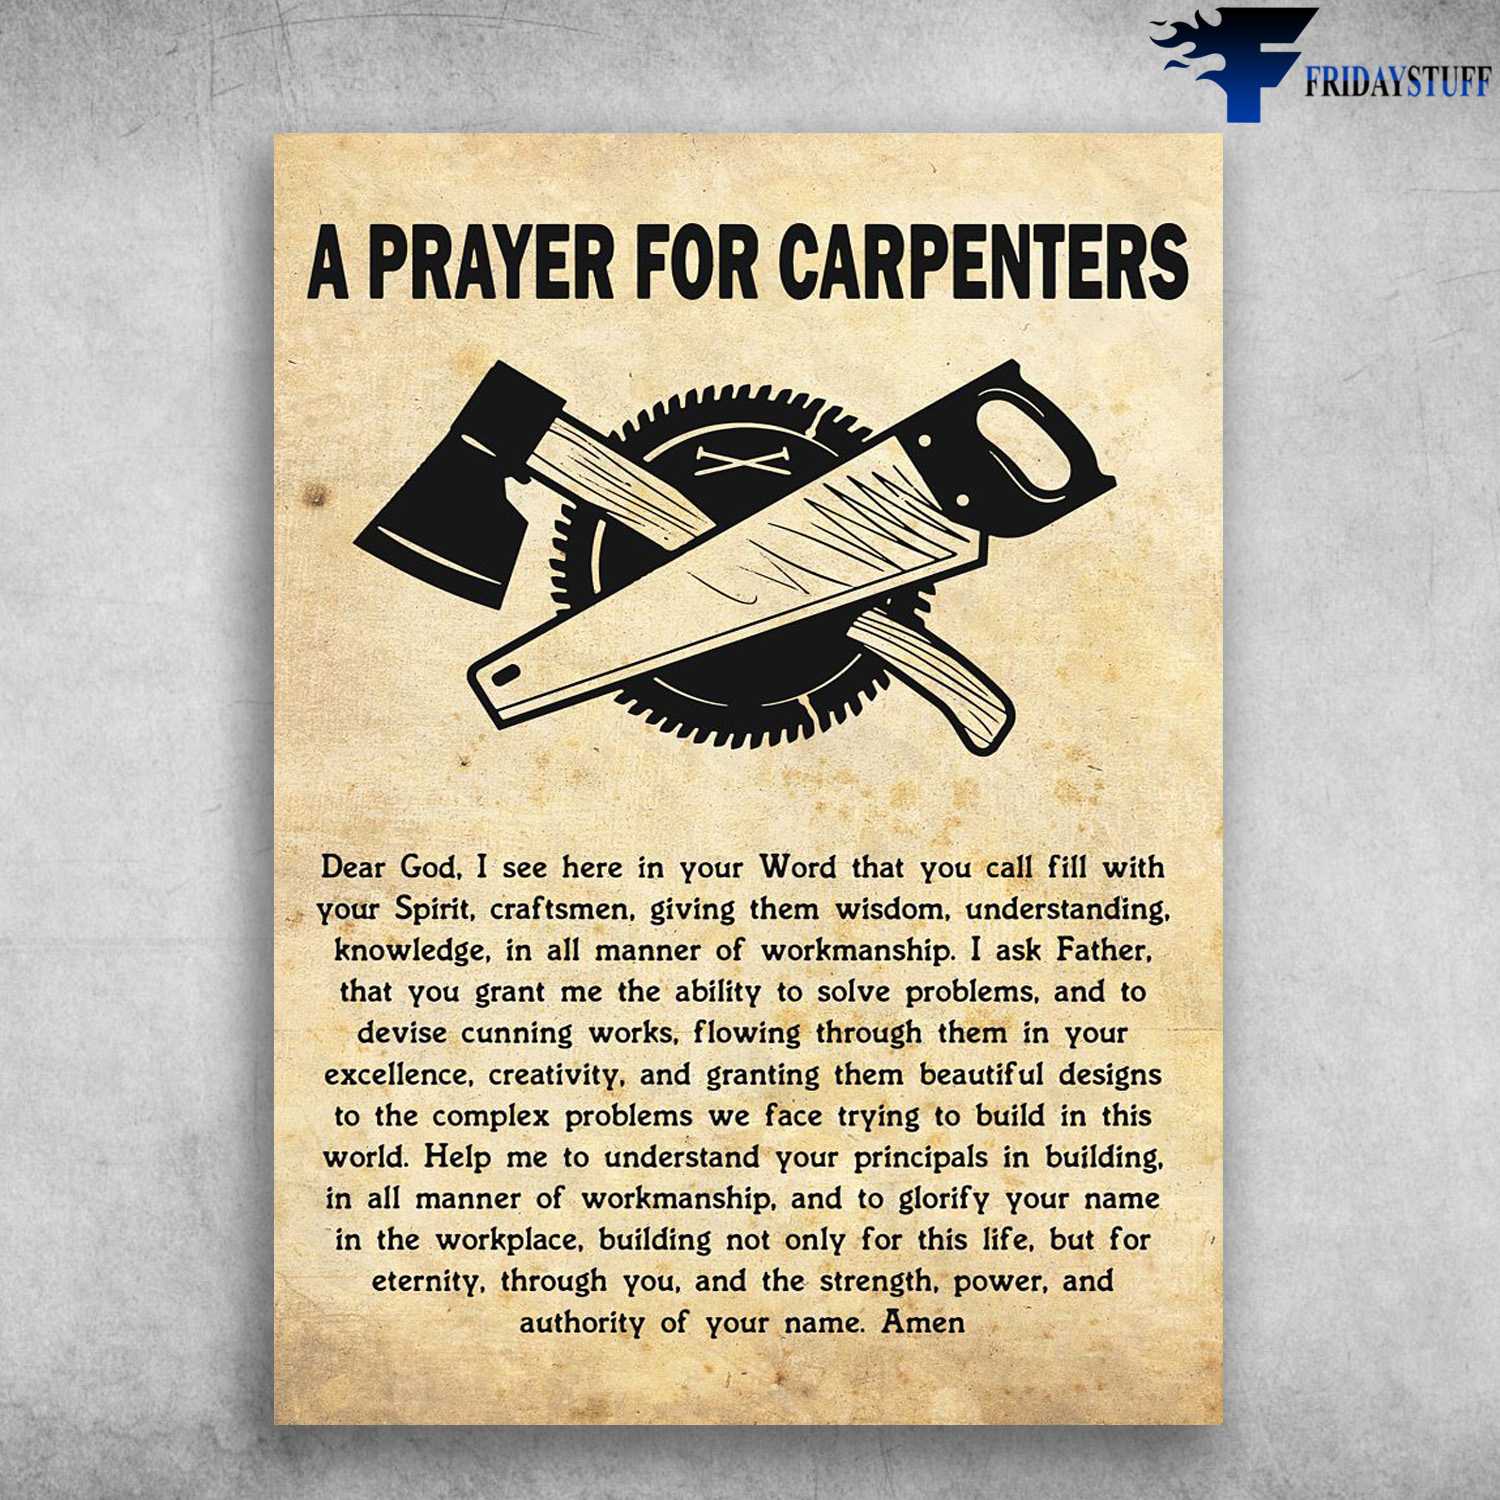 Carpenter Gift, A Prayer For Carpenters, Dear God, I See Here In Your Word, That You Call Fill With Your Spirit